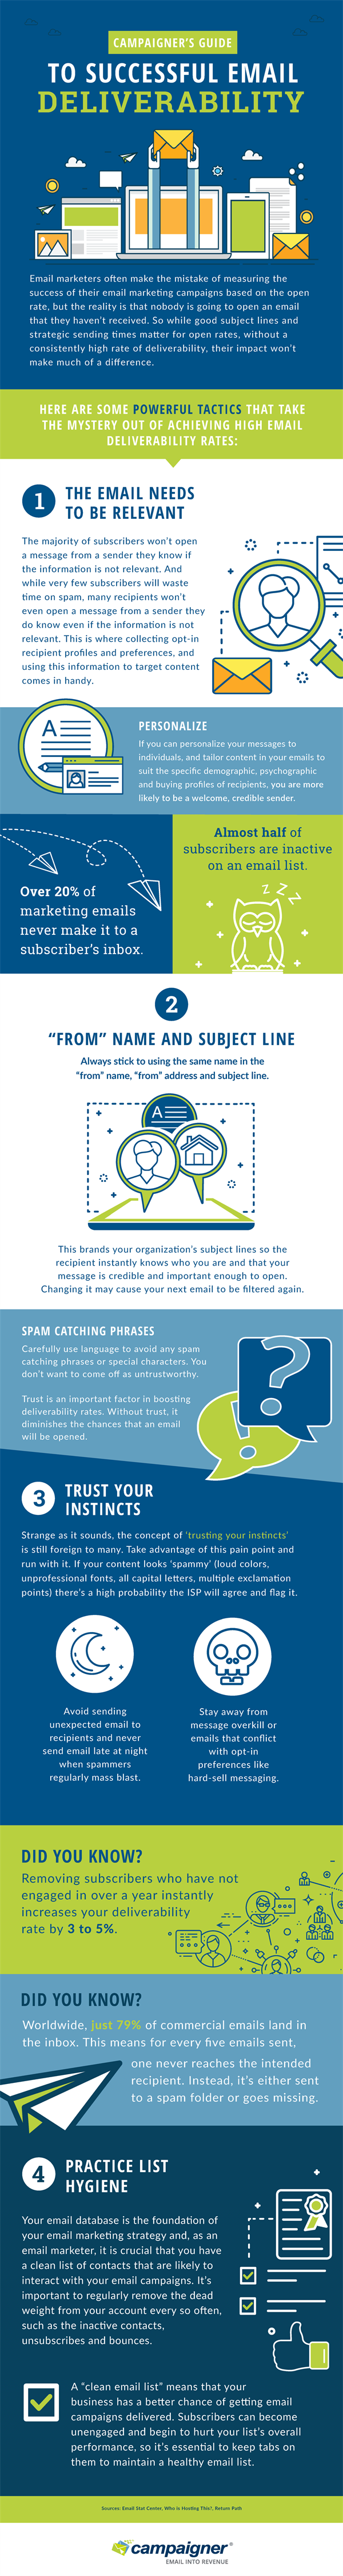 Campaigner-Email-Deliverability-Infographic-111717